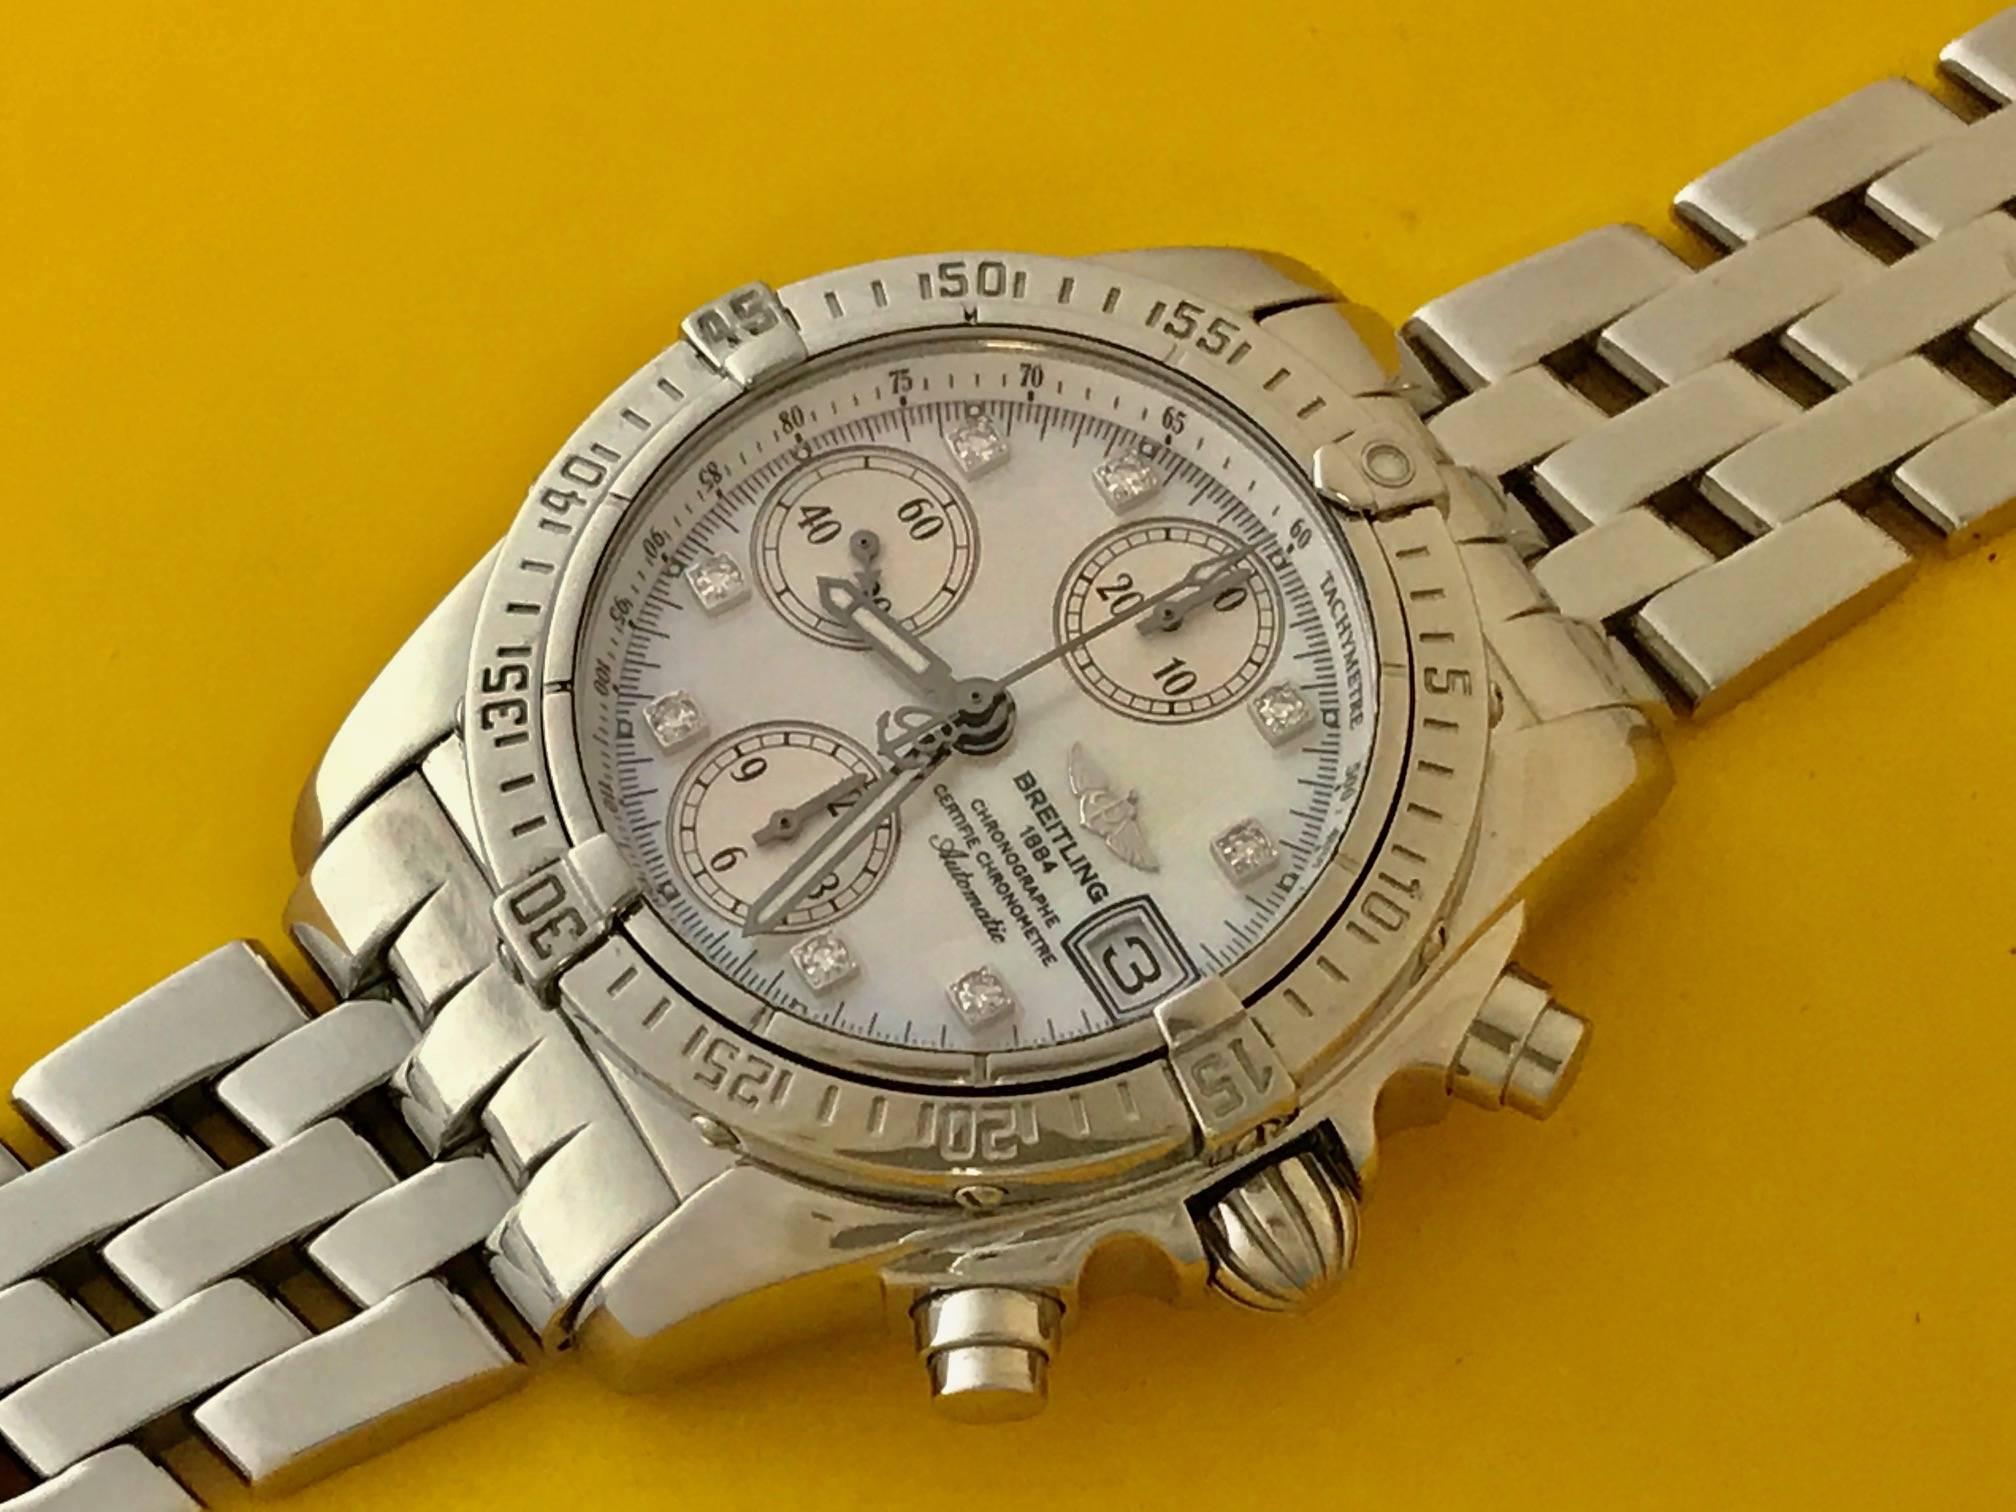 Breitling Chrono-Cockpit Stainless Steel and Diamond Wristwatch Ref A1335712. Certified Pre Owned and ready to ship! This watch can easily be worn by men and ladies. Automatic Winding with Date and Breitling factory Mother of Pearl Dial with Diamond